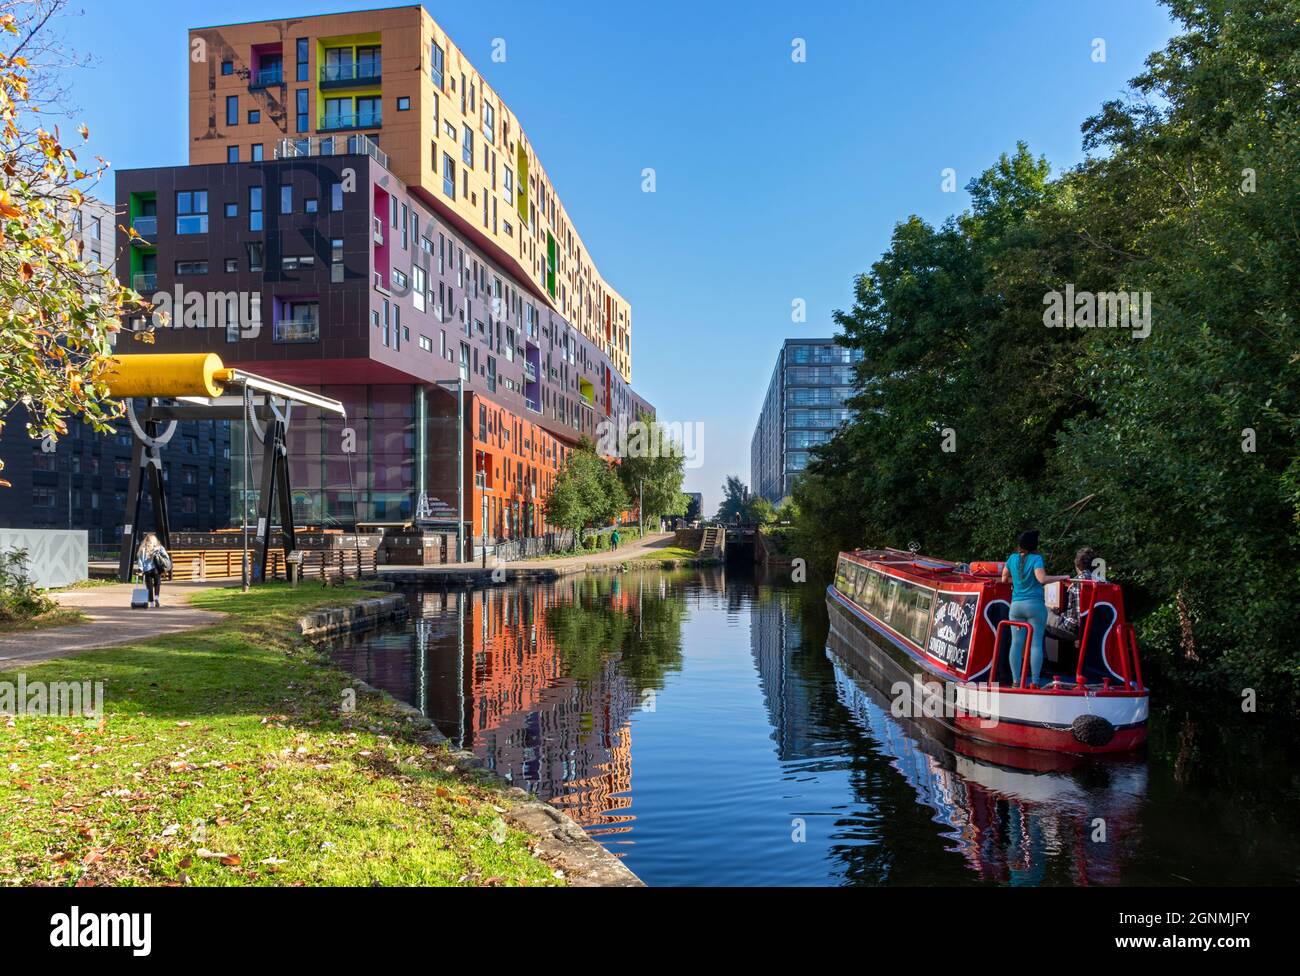 The Chips apartment building, by Will Alsop, a bascule lifting bridge and a narrowboat on the Ashton Canal, New Islington, Ancoats, Manchester, UK Stock Photo